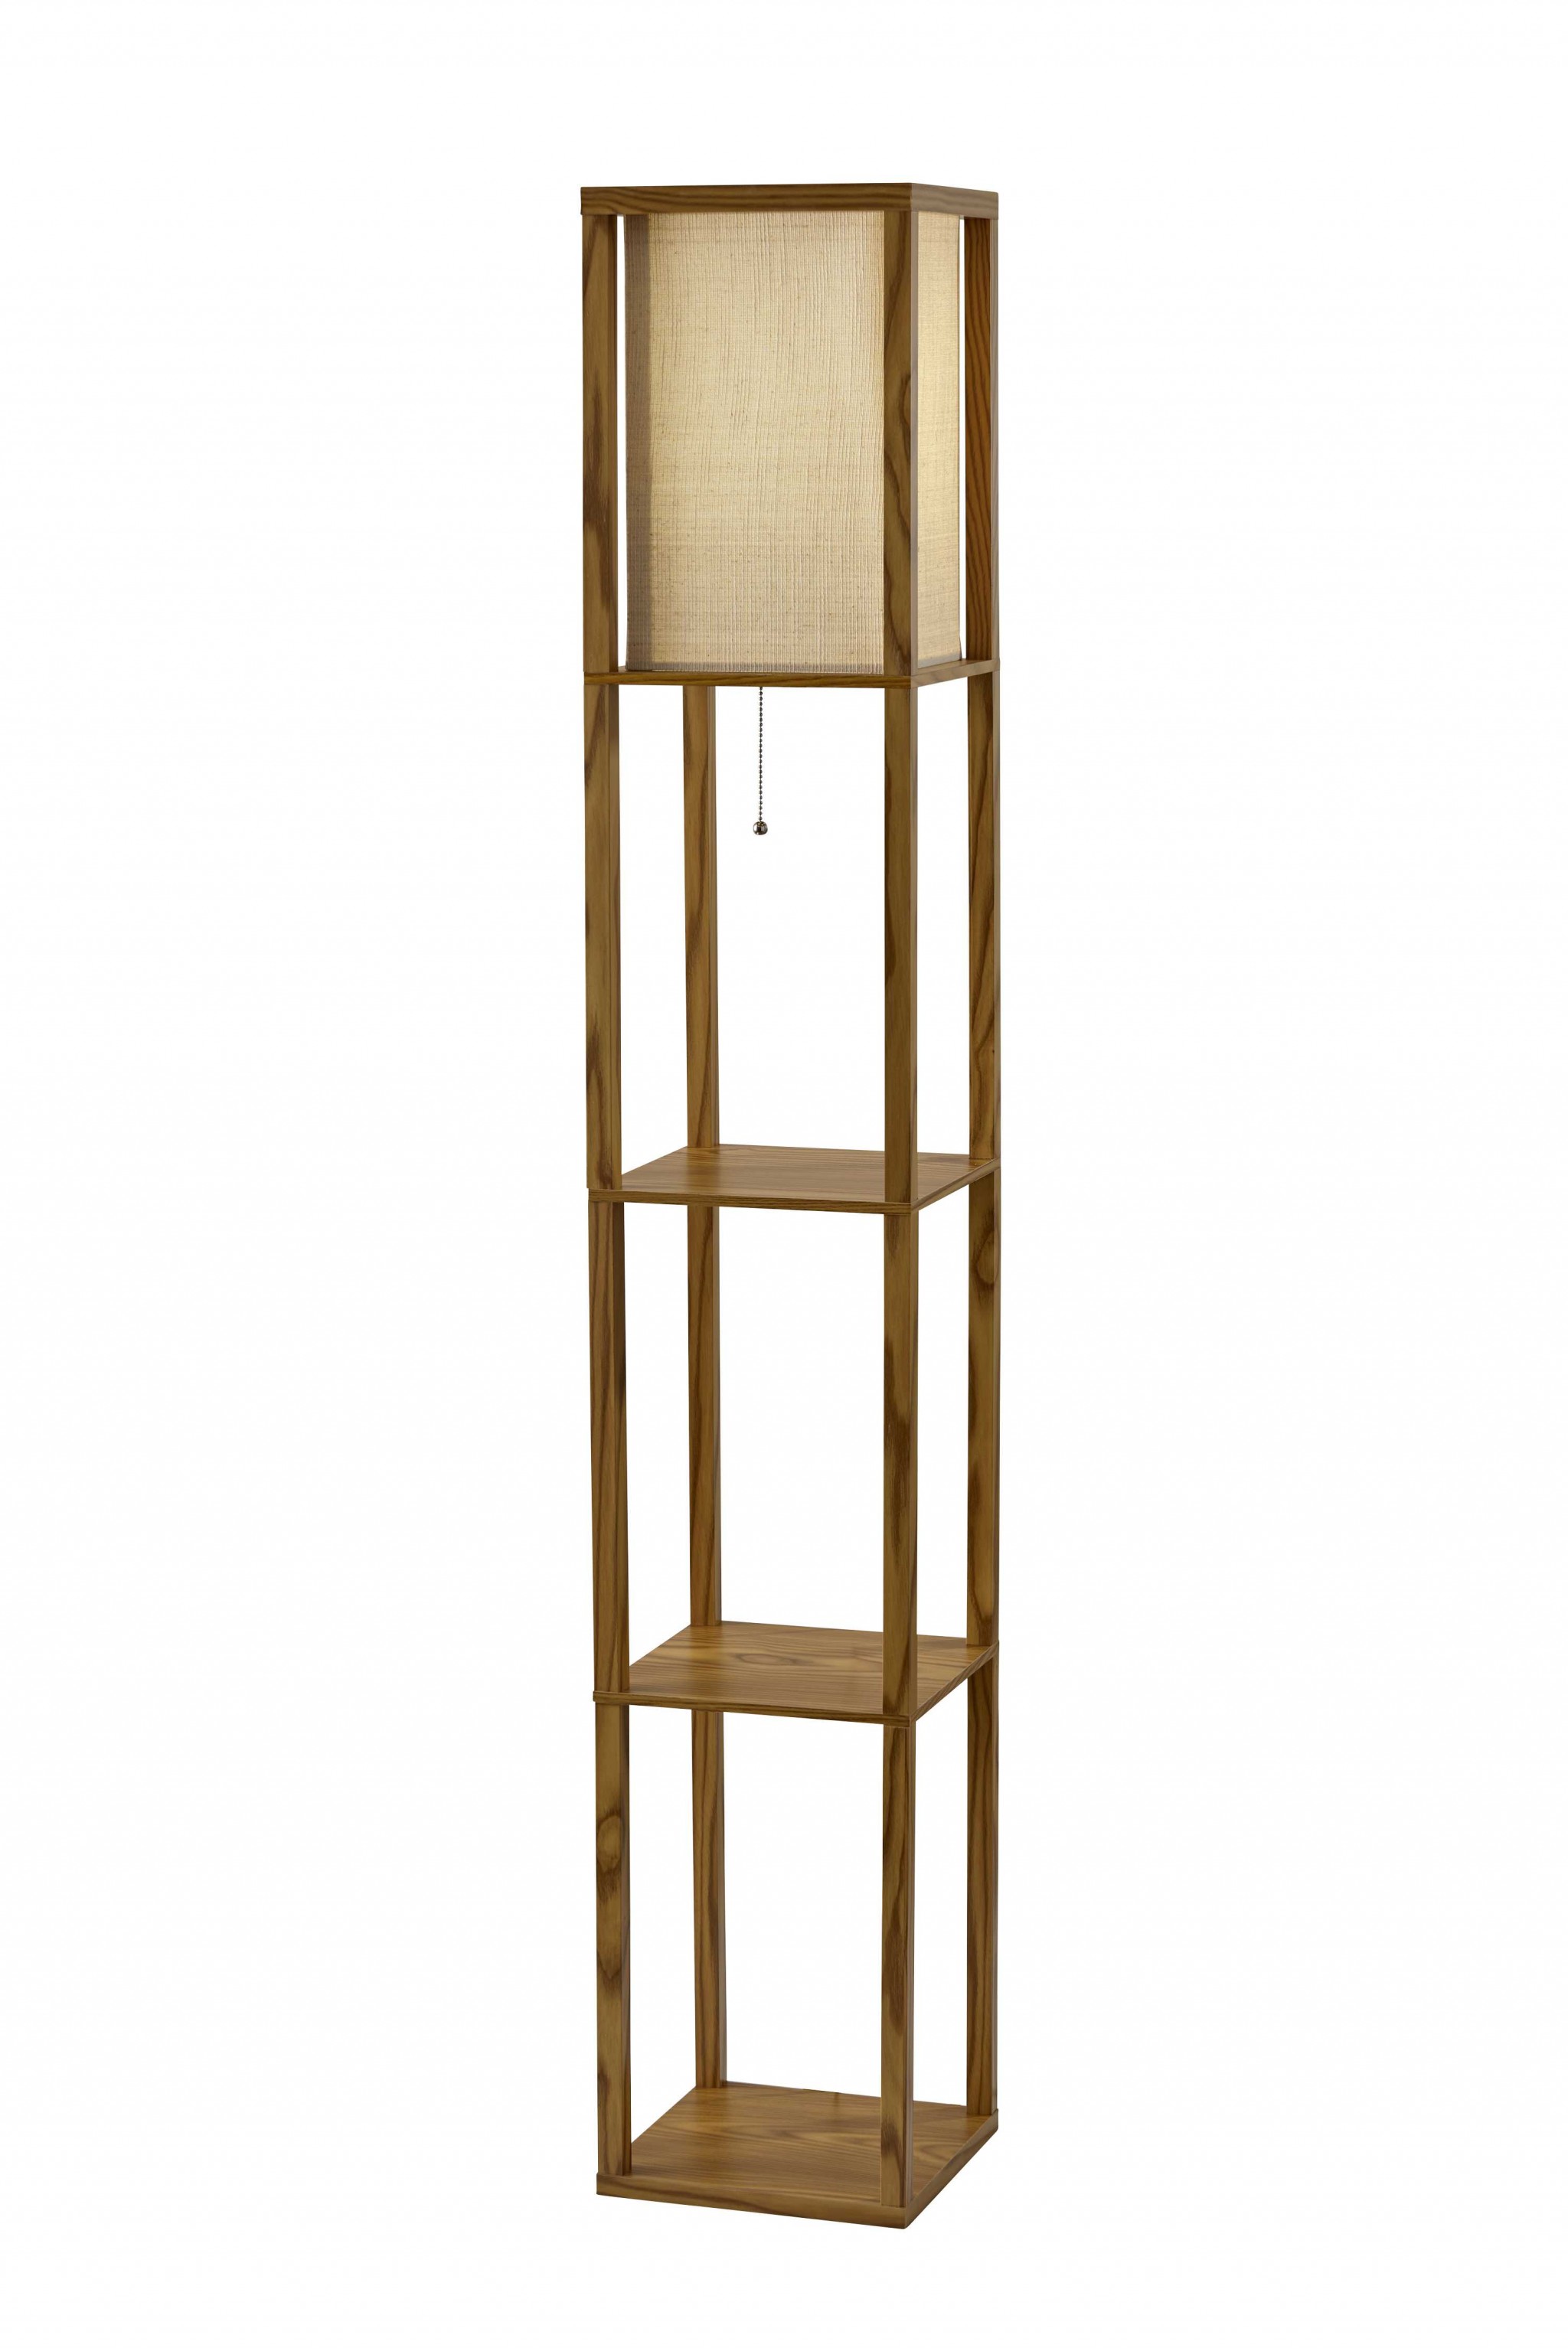 Floor Lamp With Natural Wood Finish Storage Shelves-372525-1